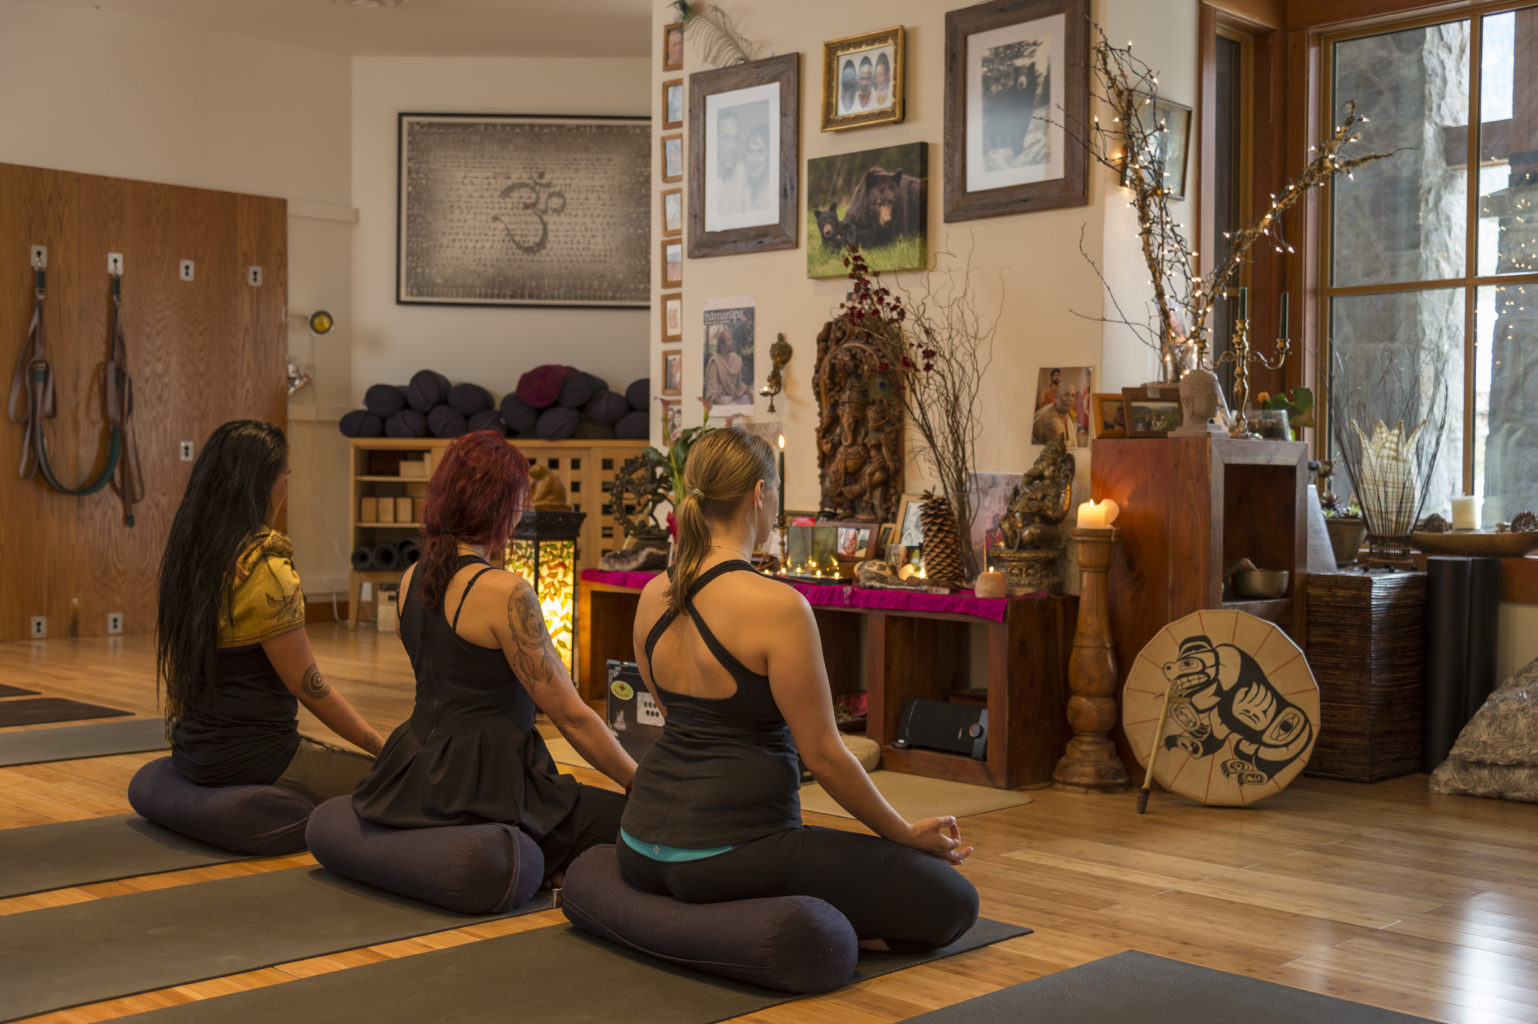 People mediating and doing yoga in a quiet room